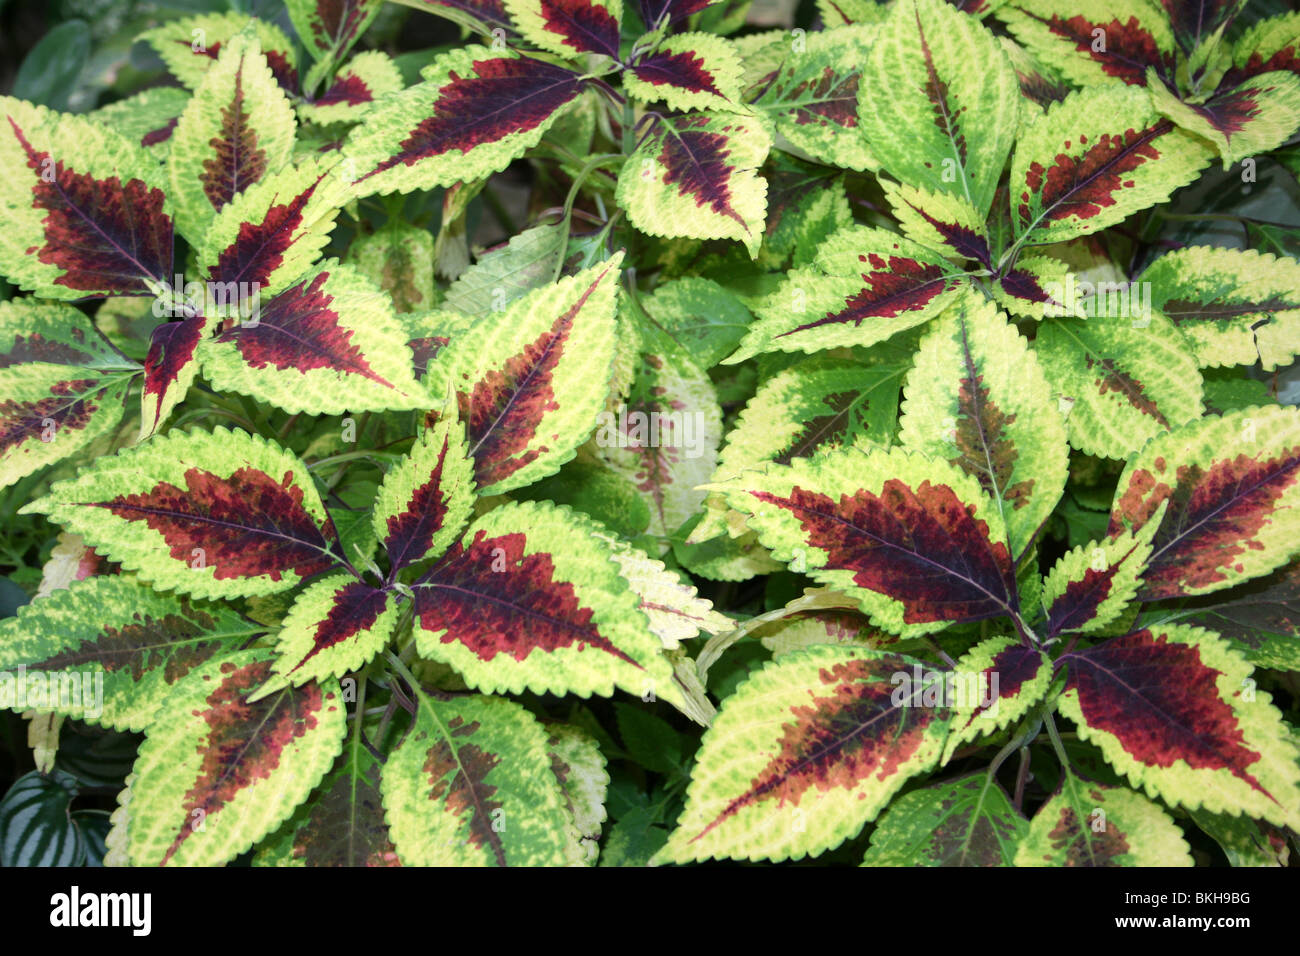 Variegated Leaves Of Coleus blumei Taken At Chester Zoo, England, UK Stock Photo